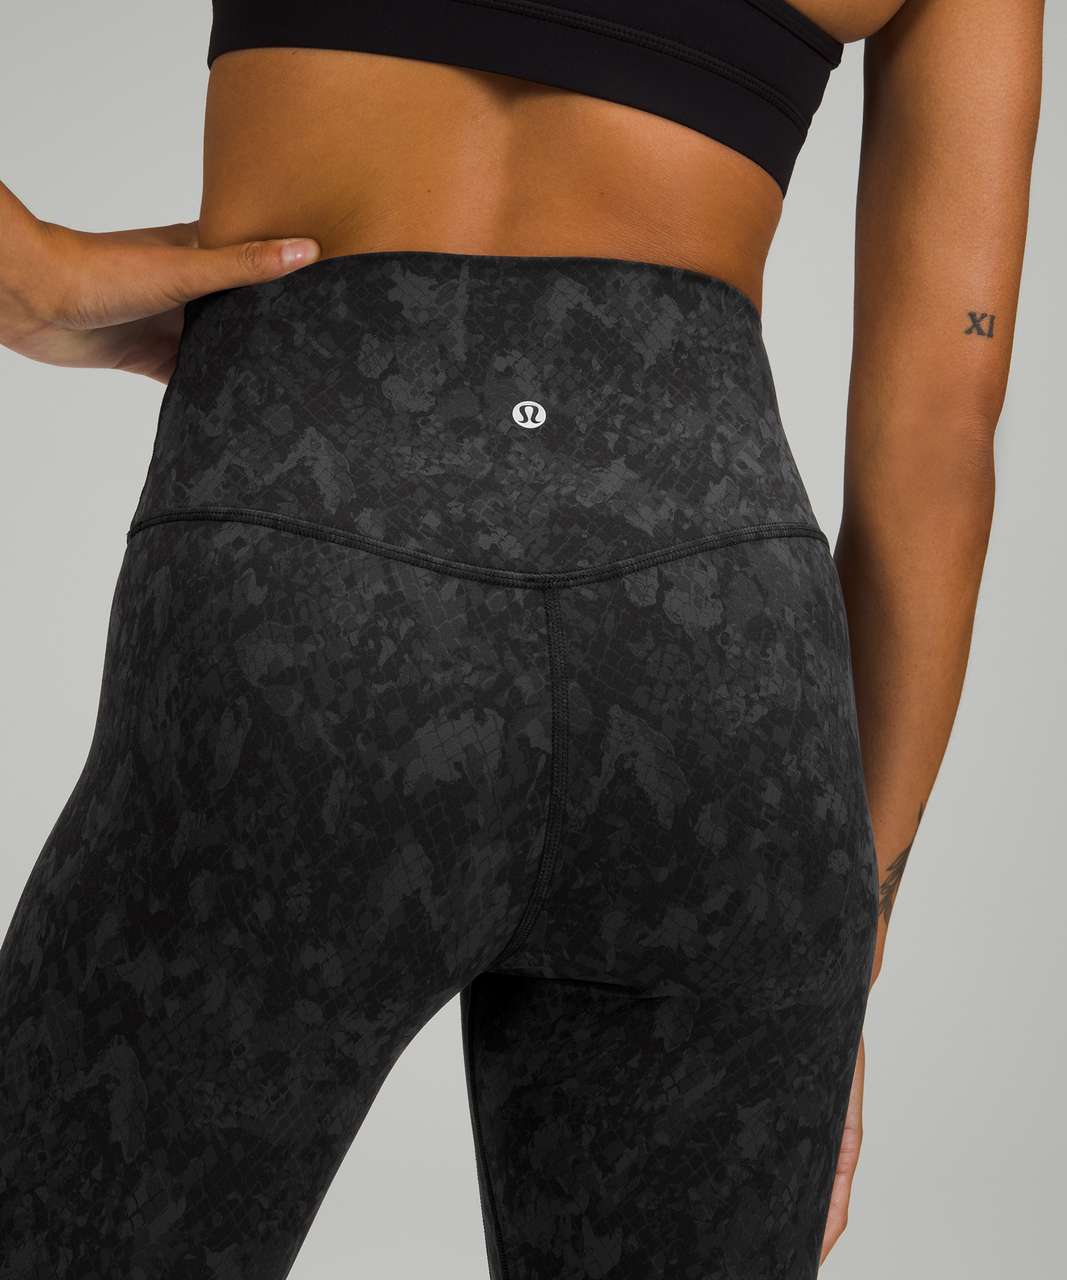 Lululemon Align High-Rise Pant with Pockets 25 - Hideaway Camo